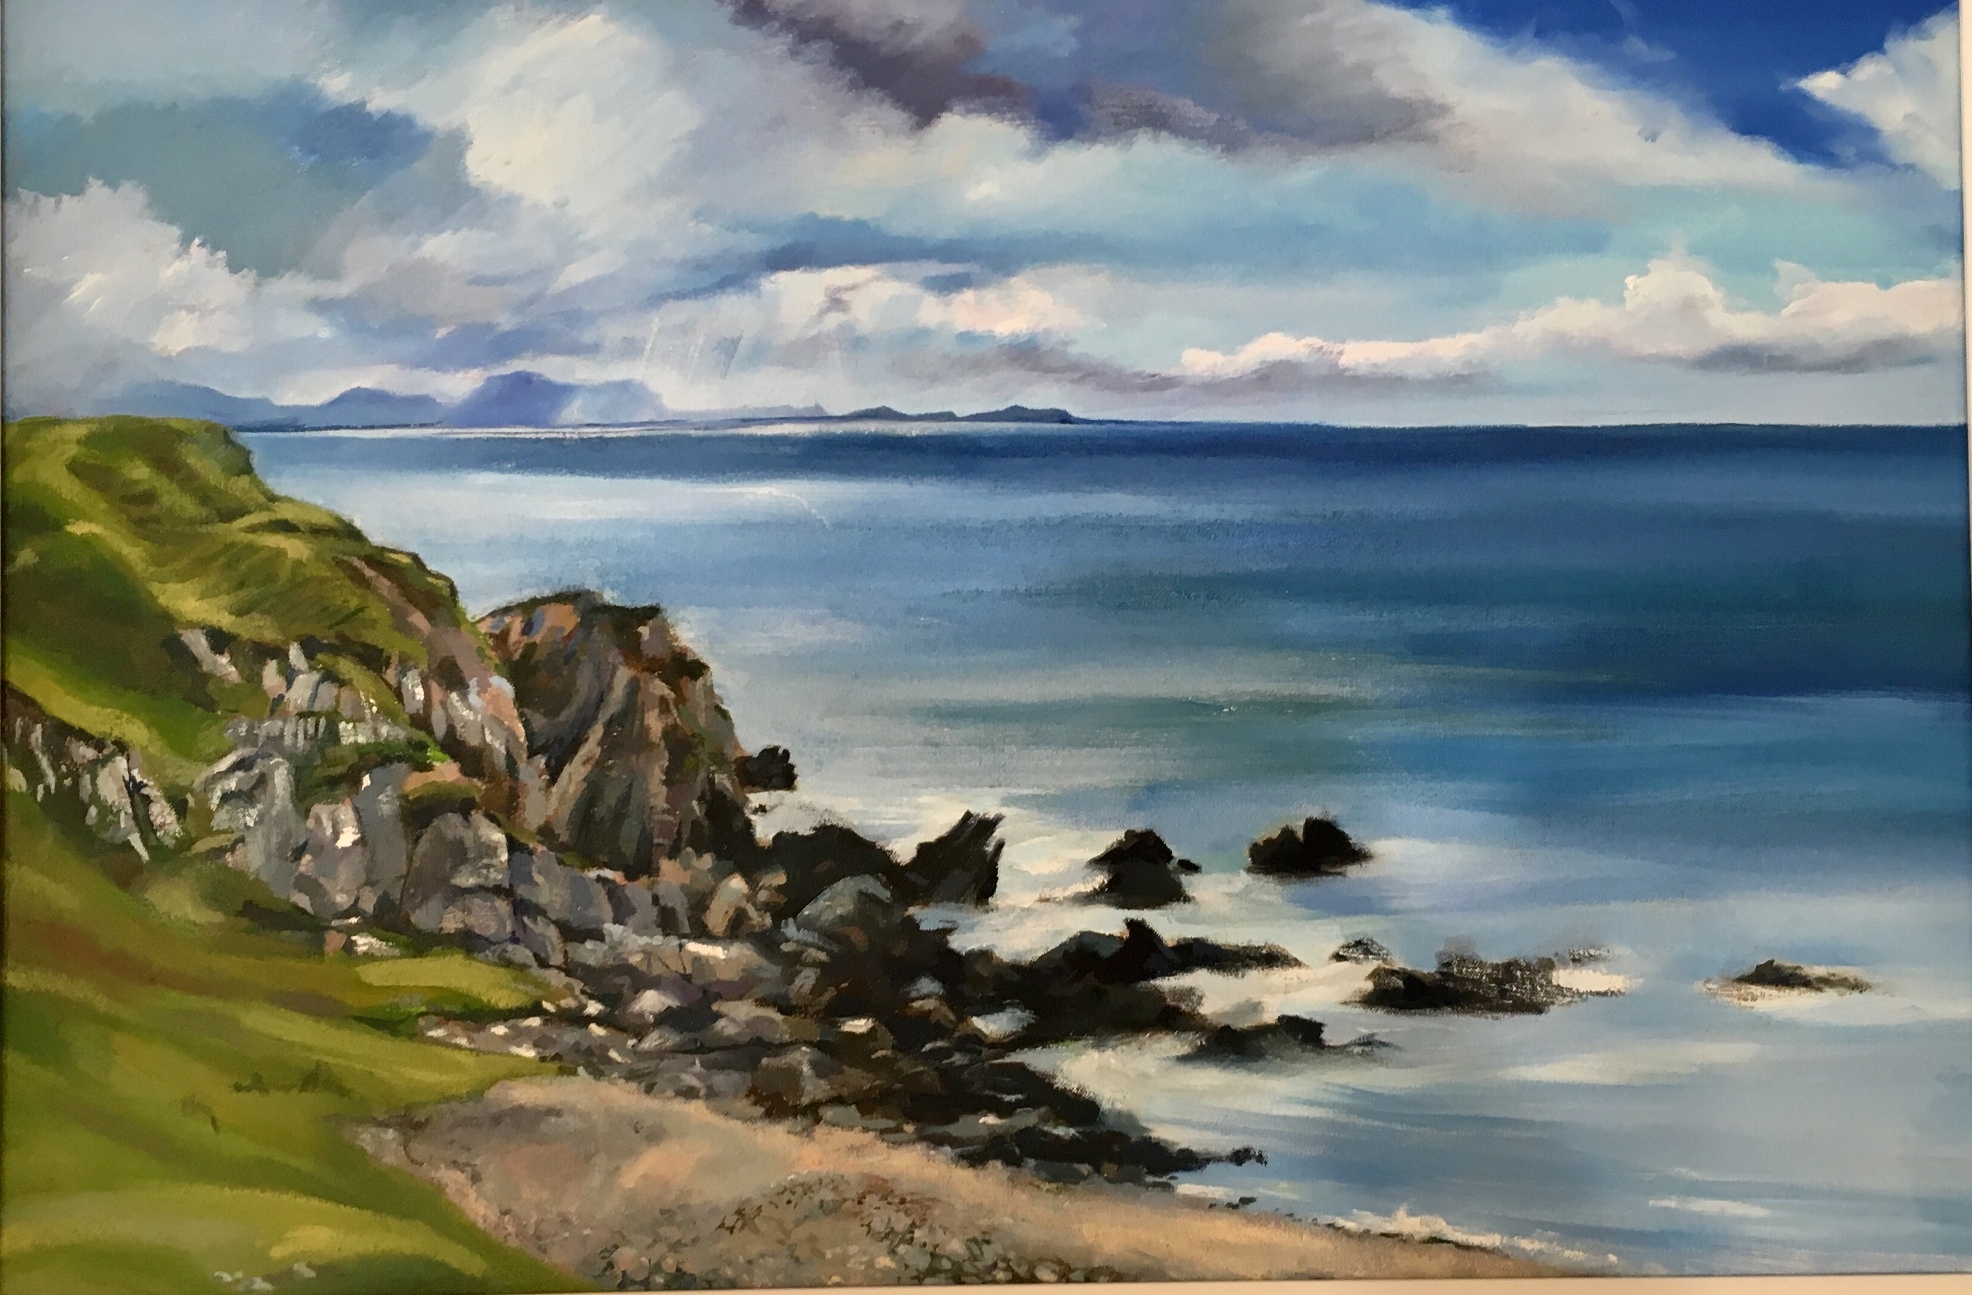 'Over the Sea to Skye' by artist Catherine King